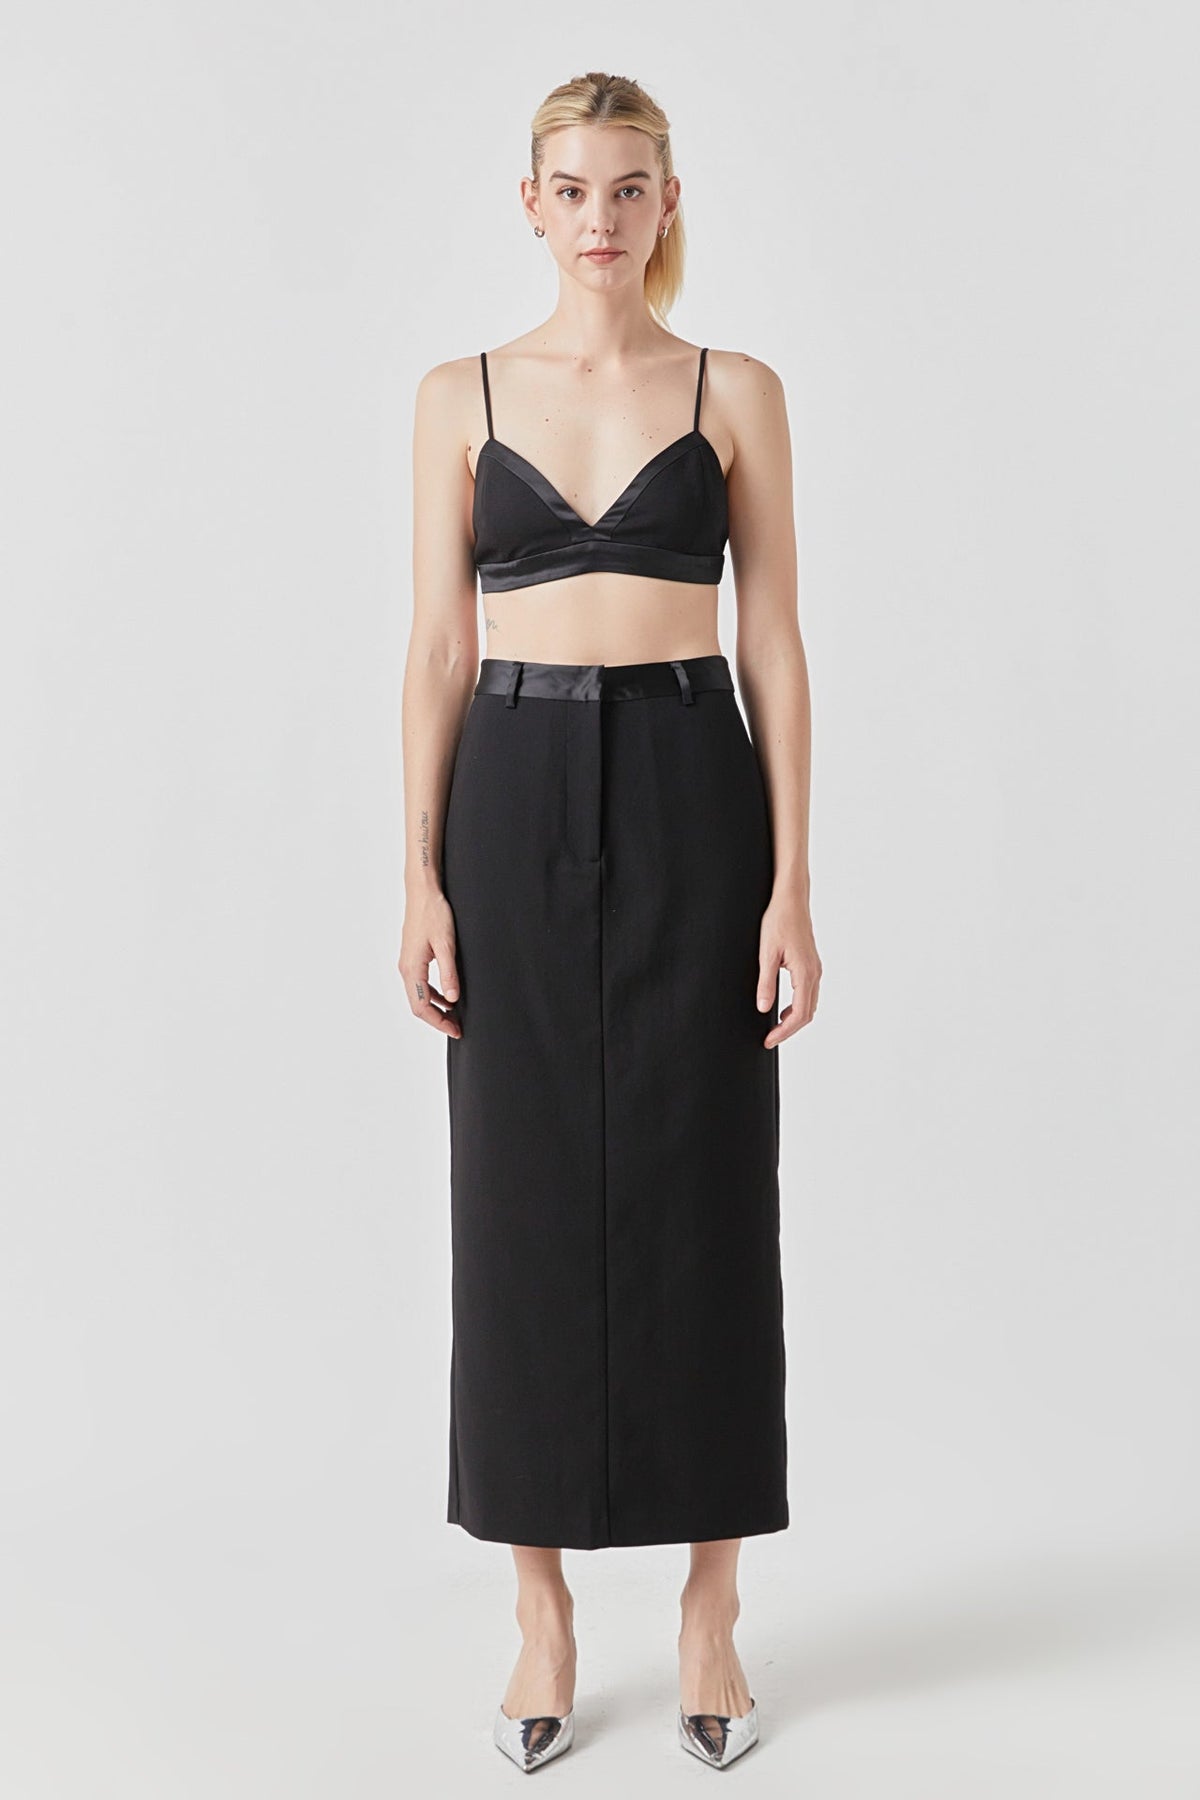 GREY LAB - Satin Contrast Maxi Skirt - SKIRTS available at Objectrare